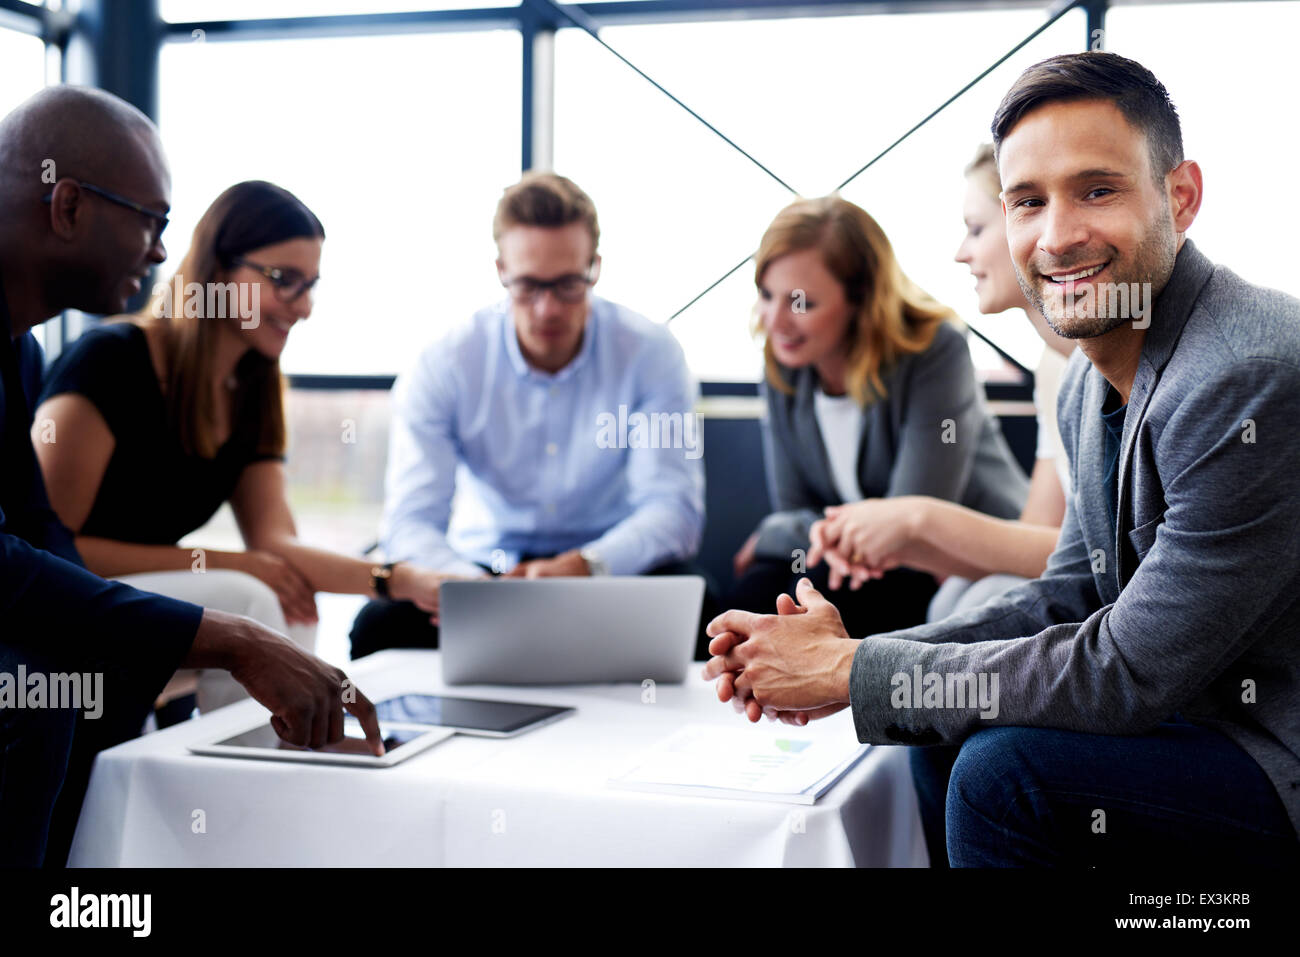 White male executive sitting and smiling at camera during a meeting with colleagues Stock Photo